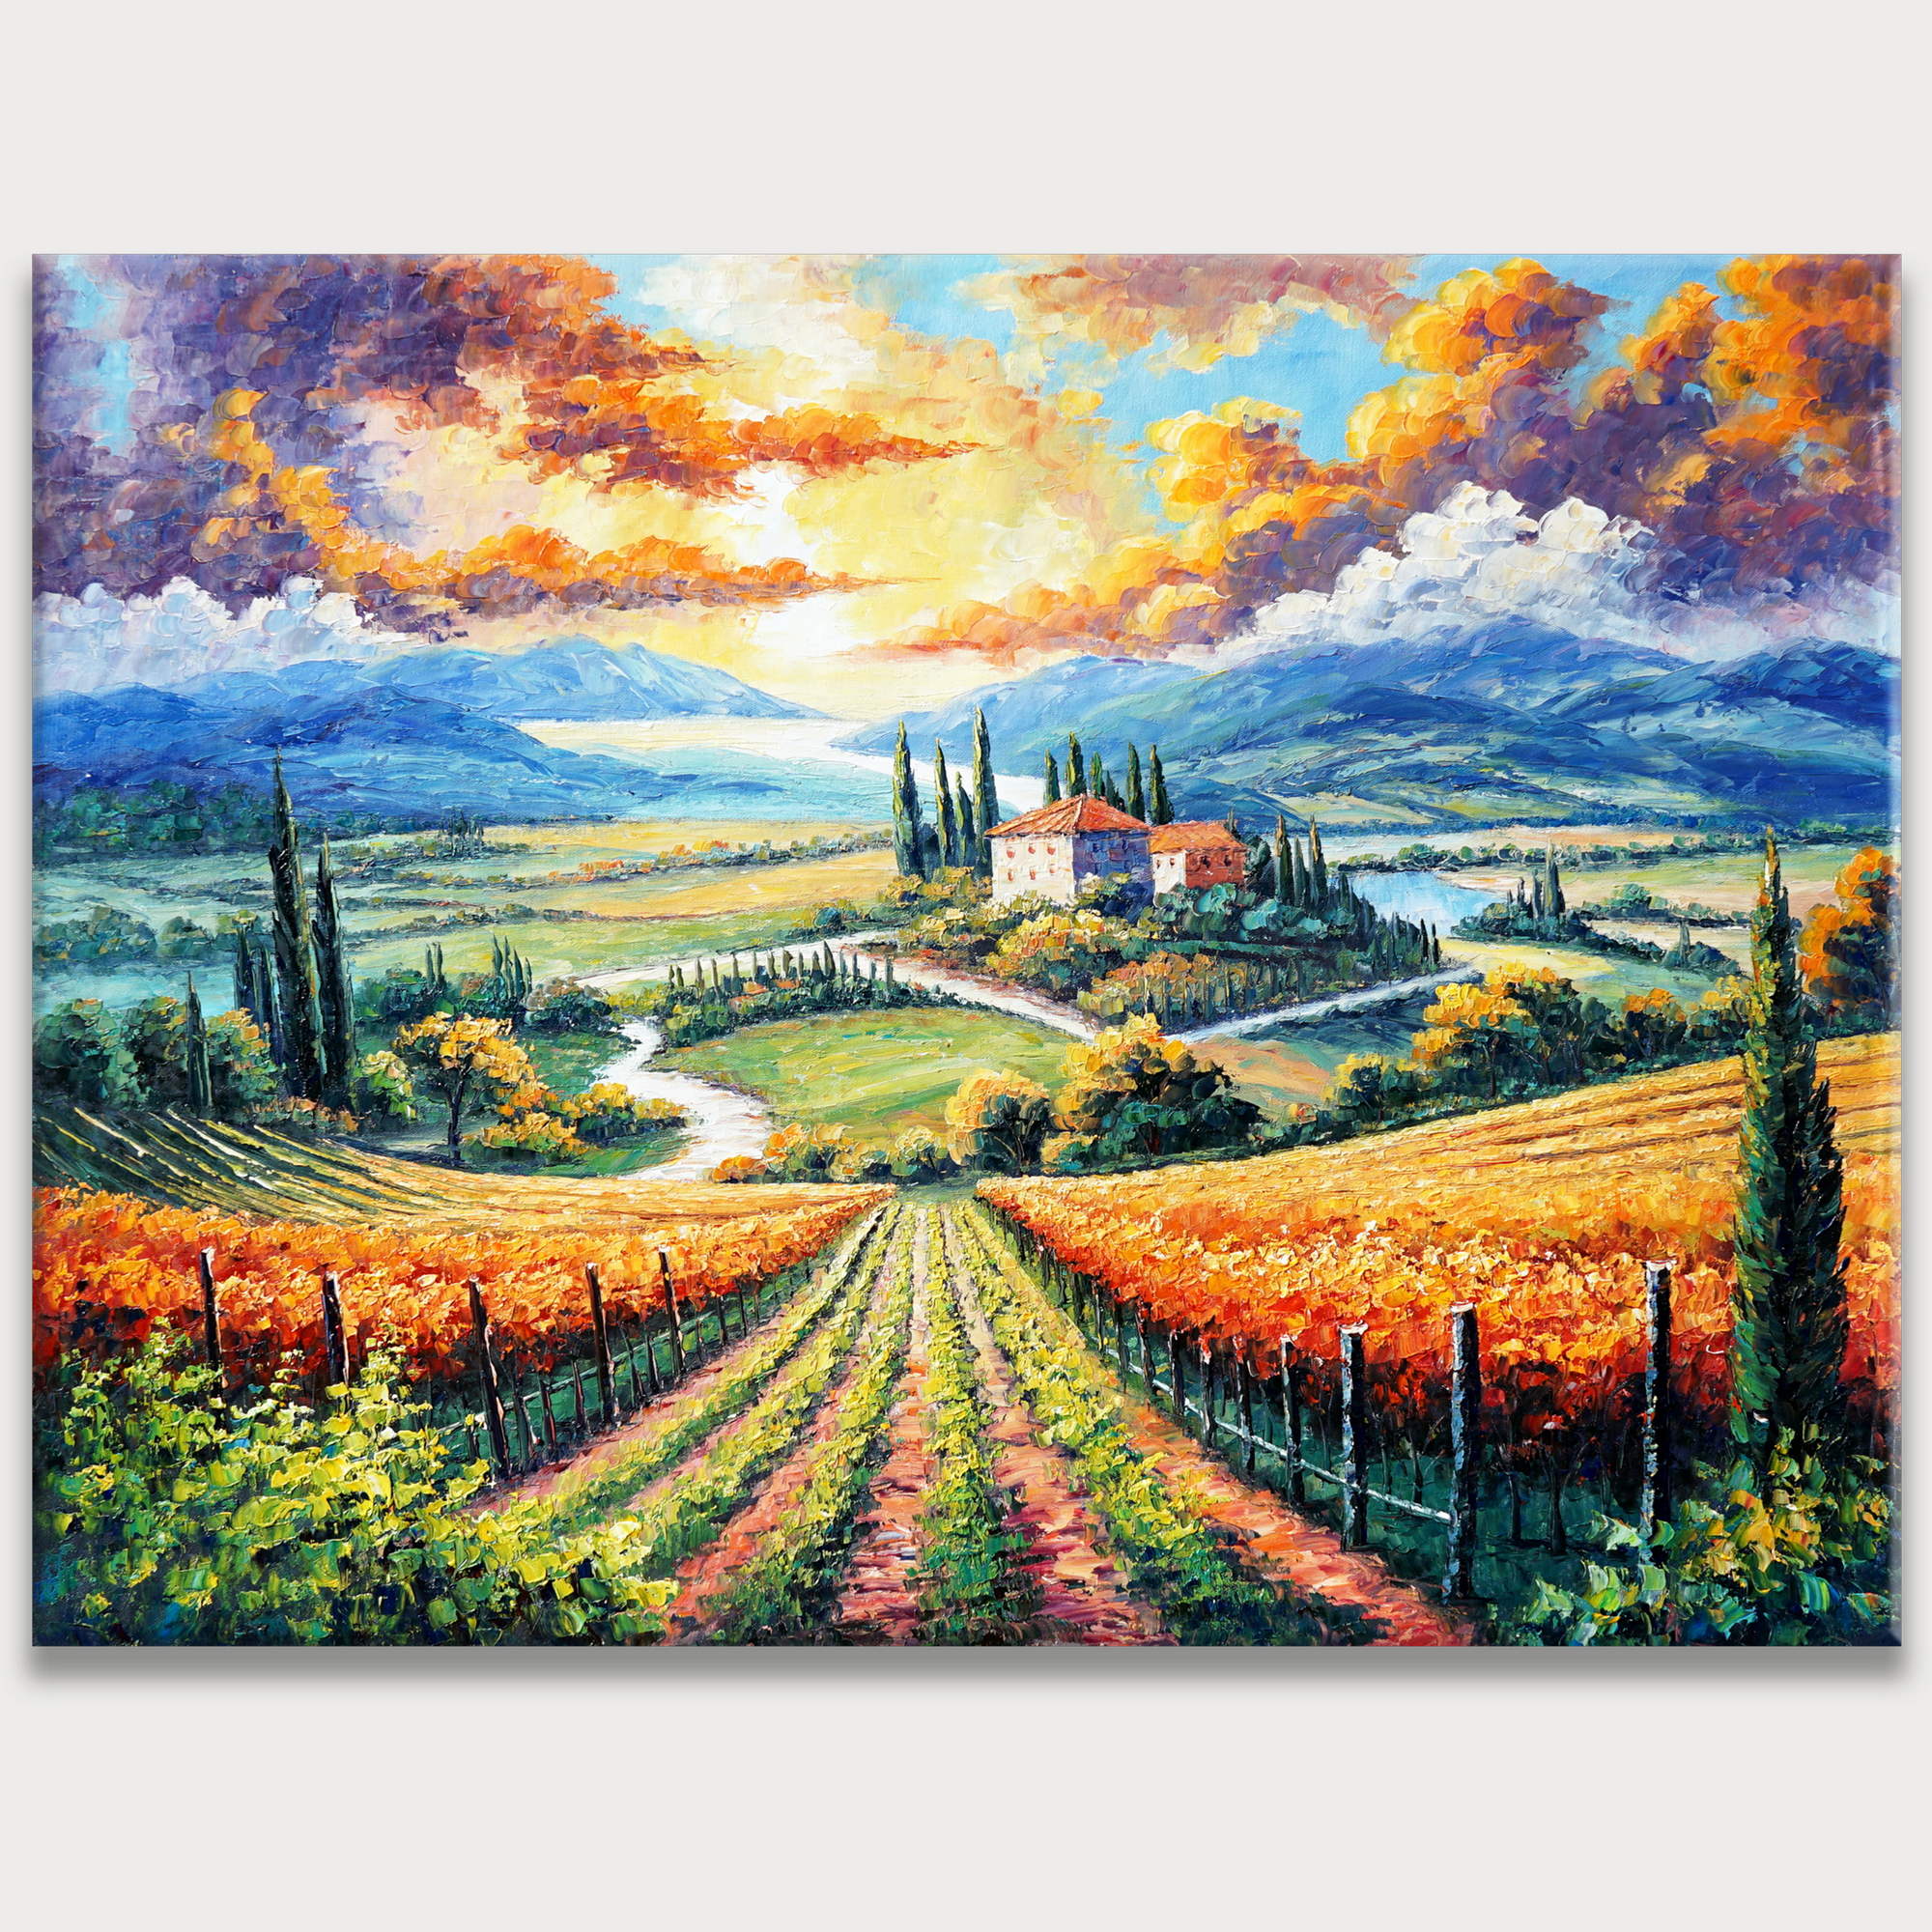 Hand painted Tuscany sunset over the vineyards 75x100cm